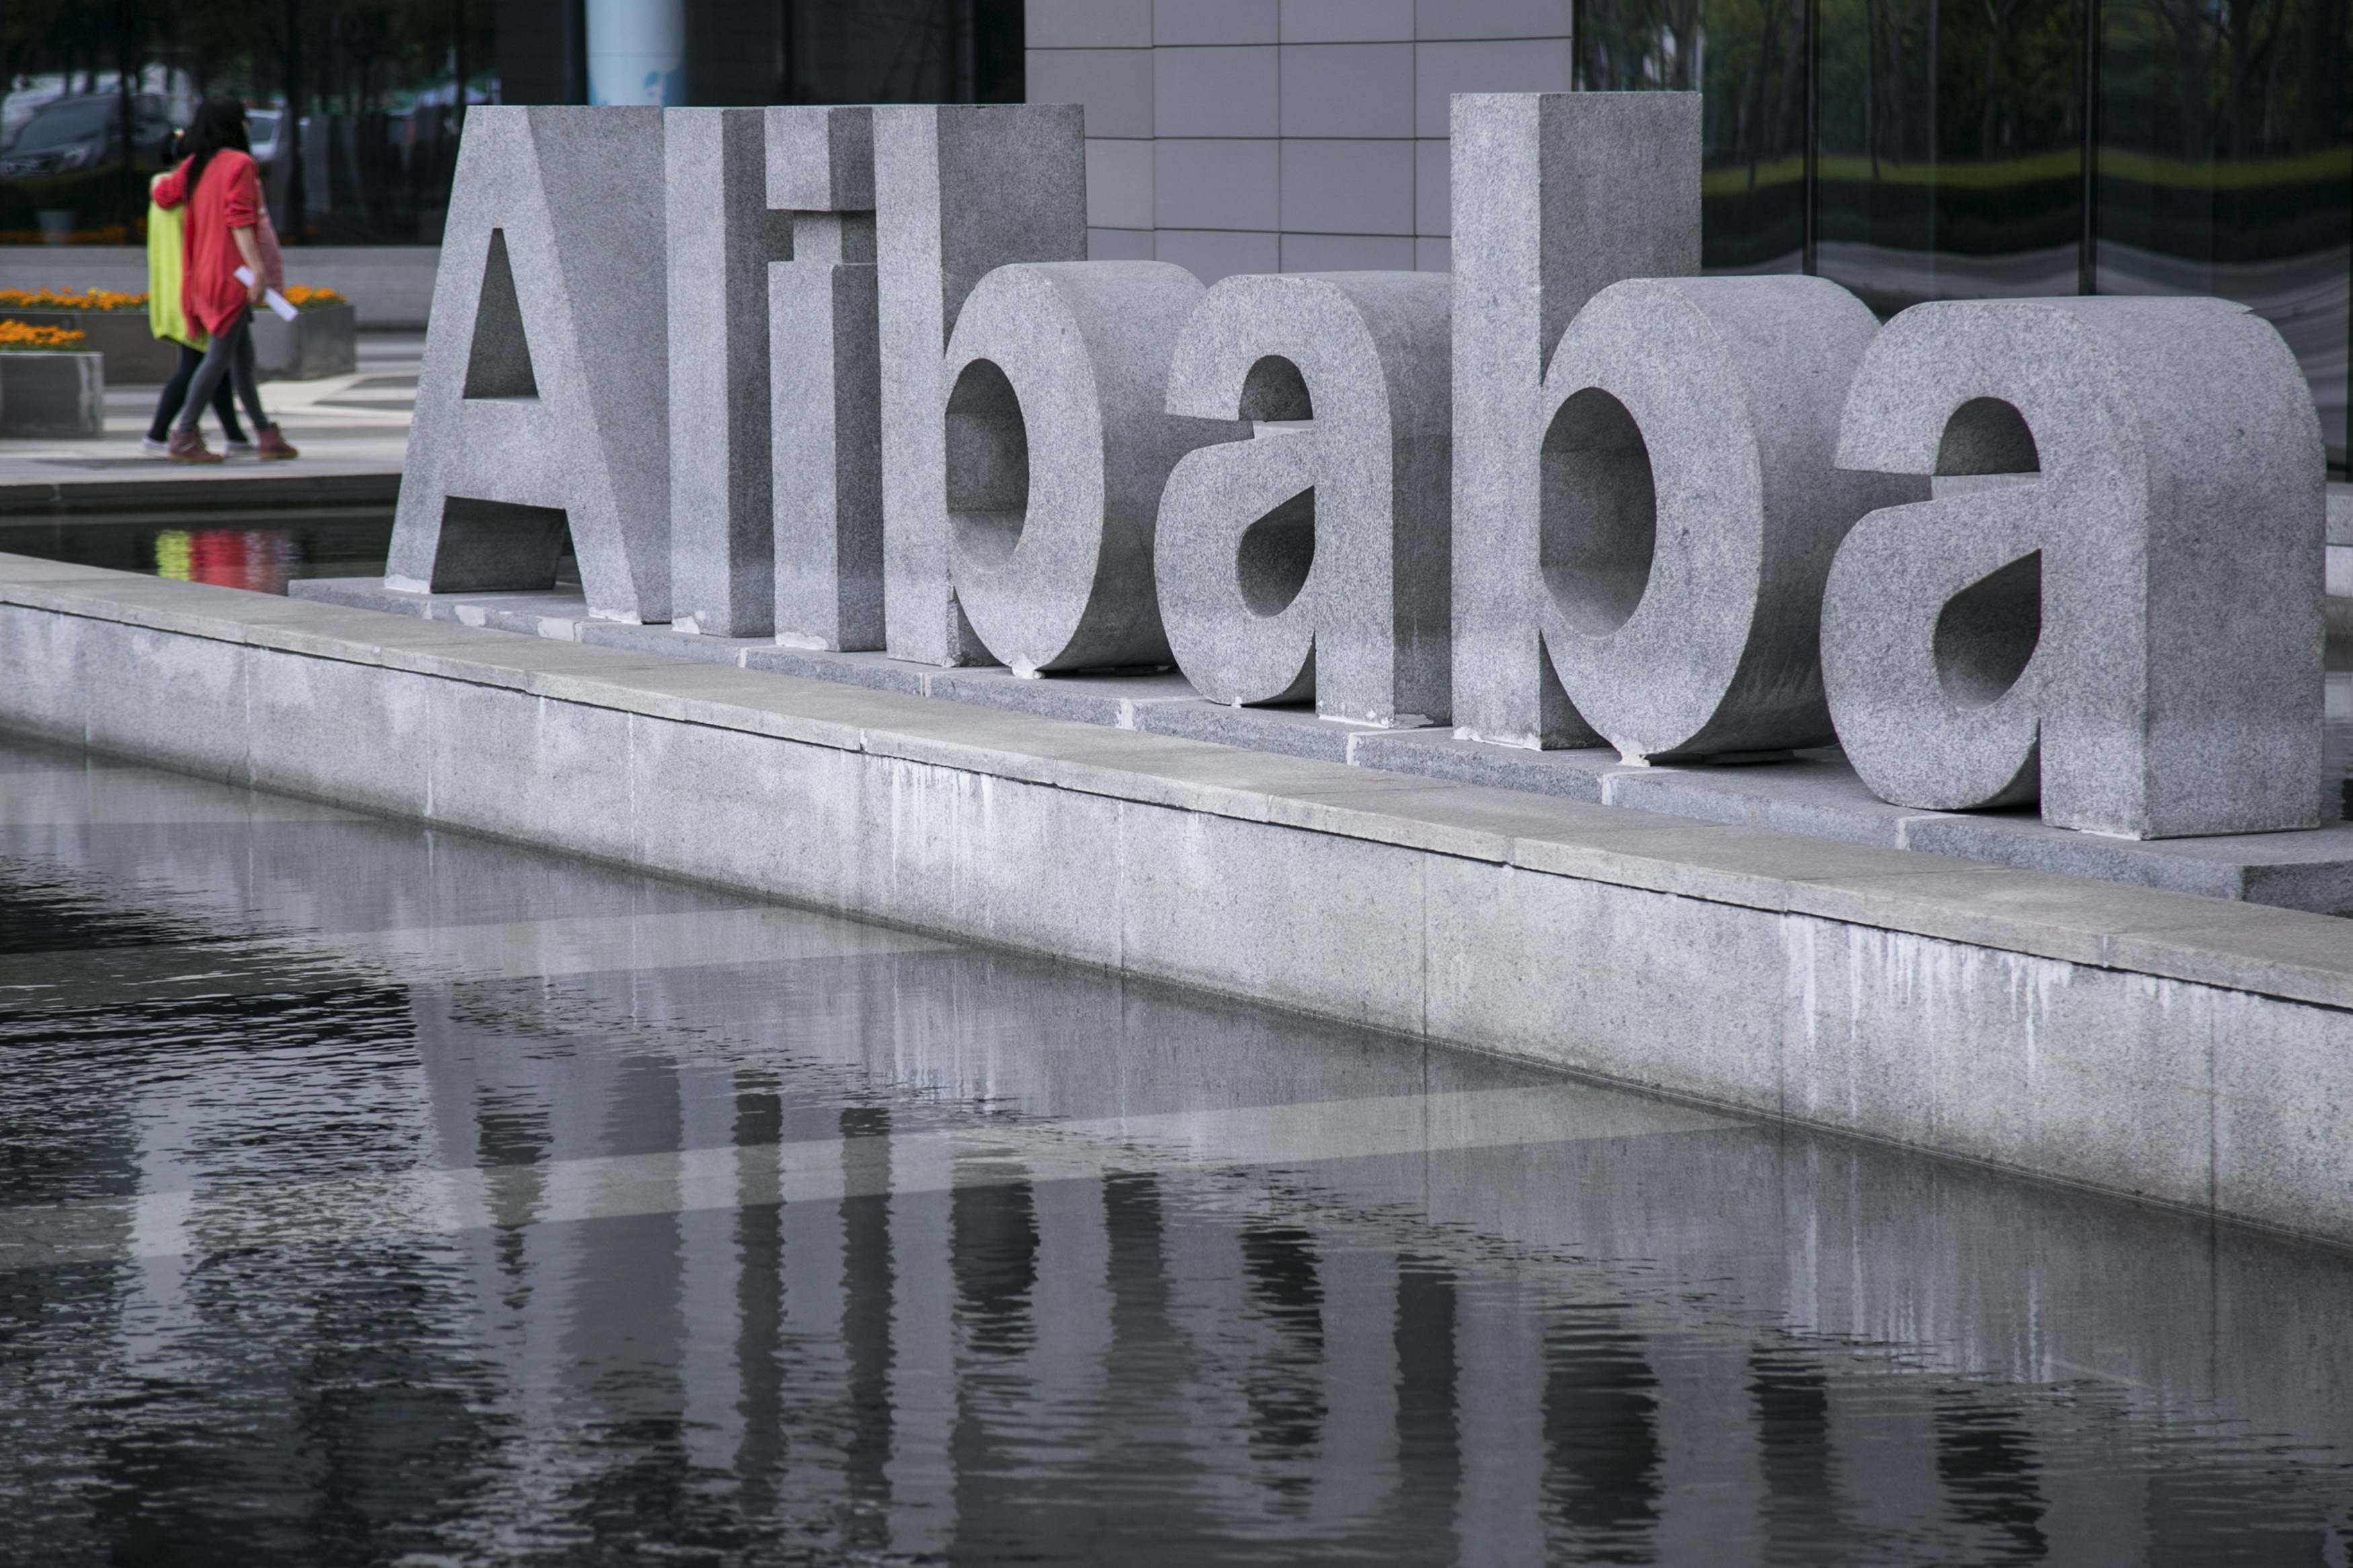 Alibaba aims for largest ever IPO